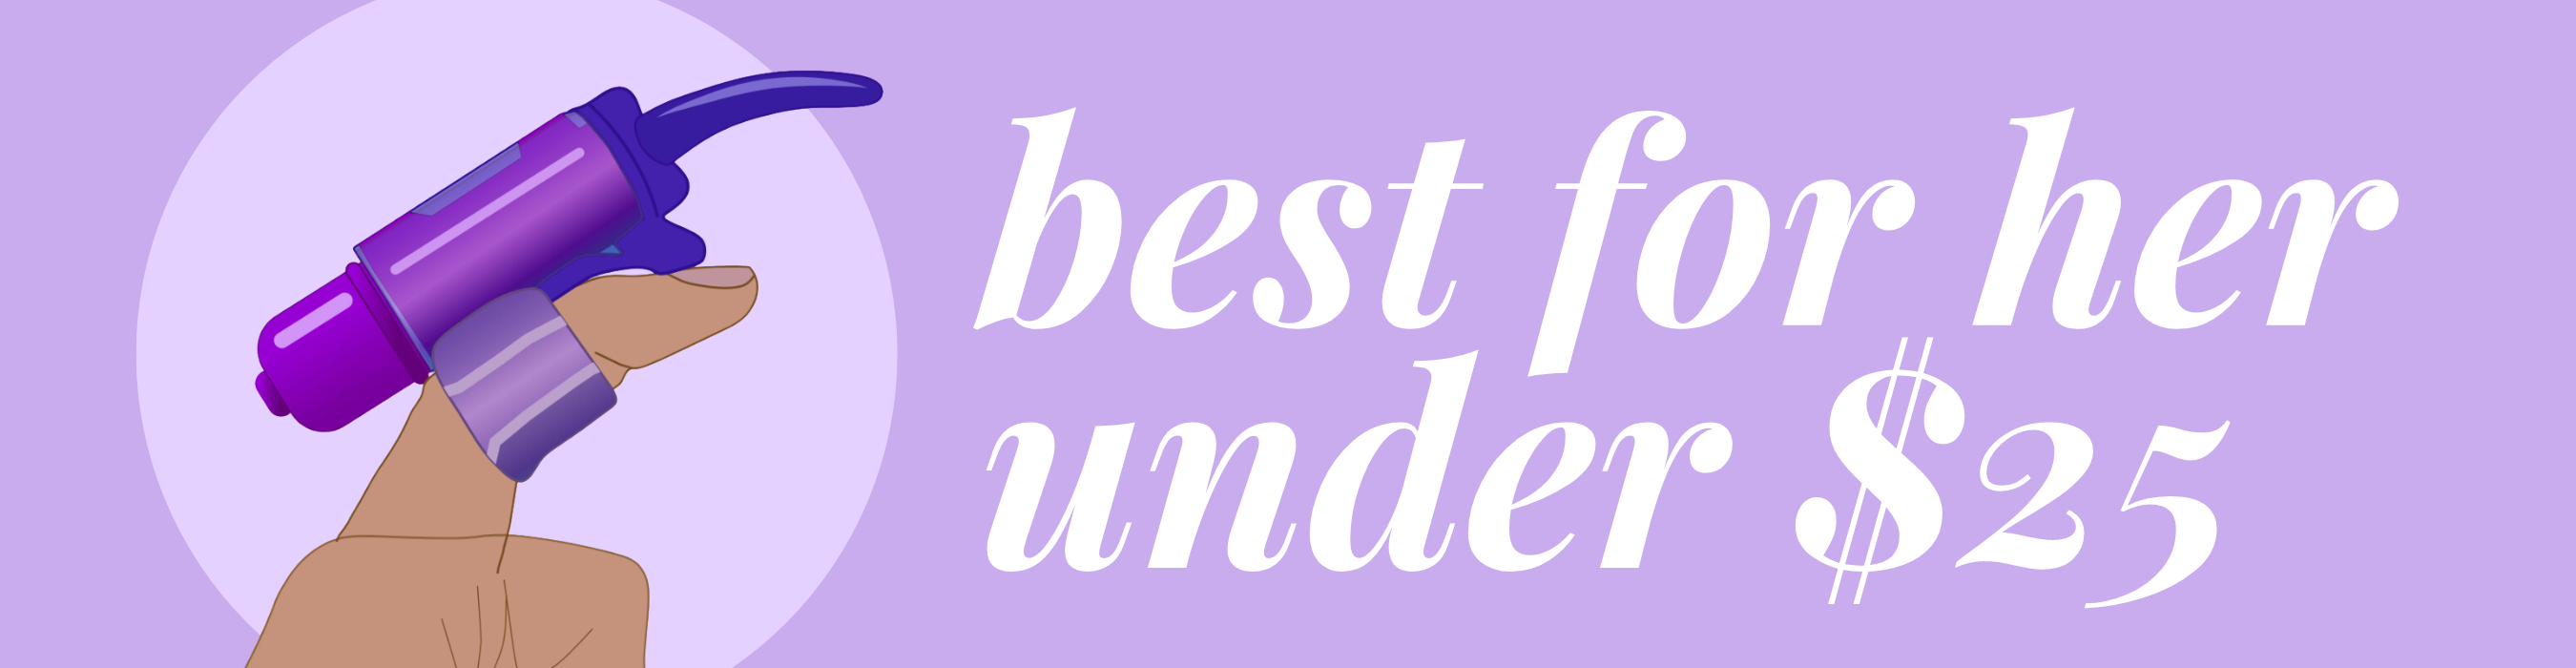 Best gifts for her under $25